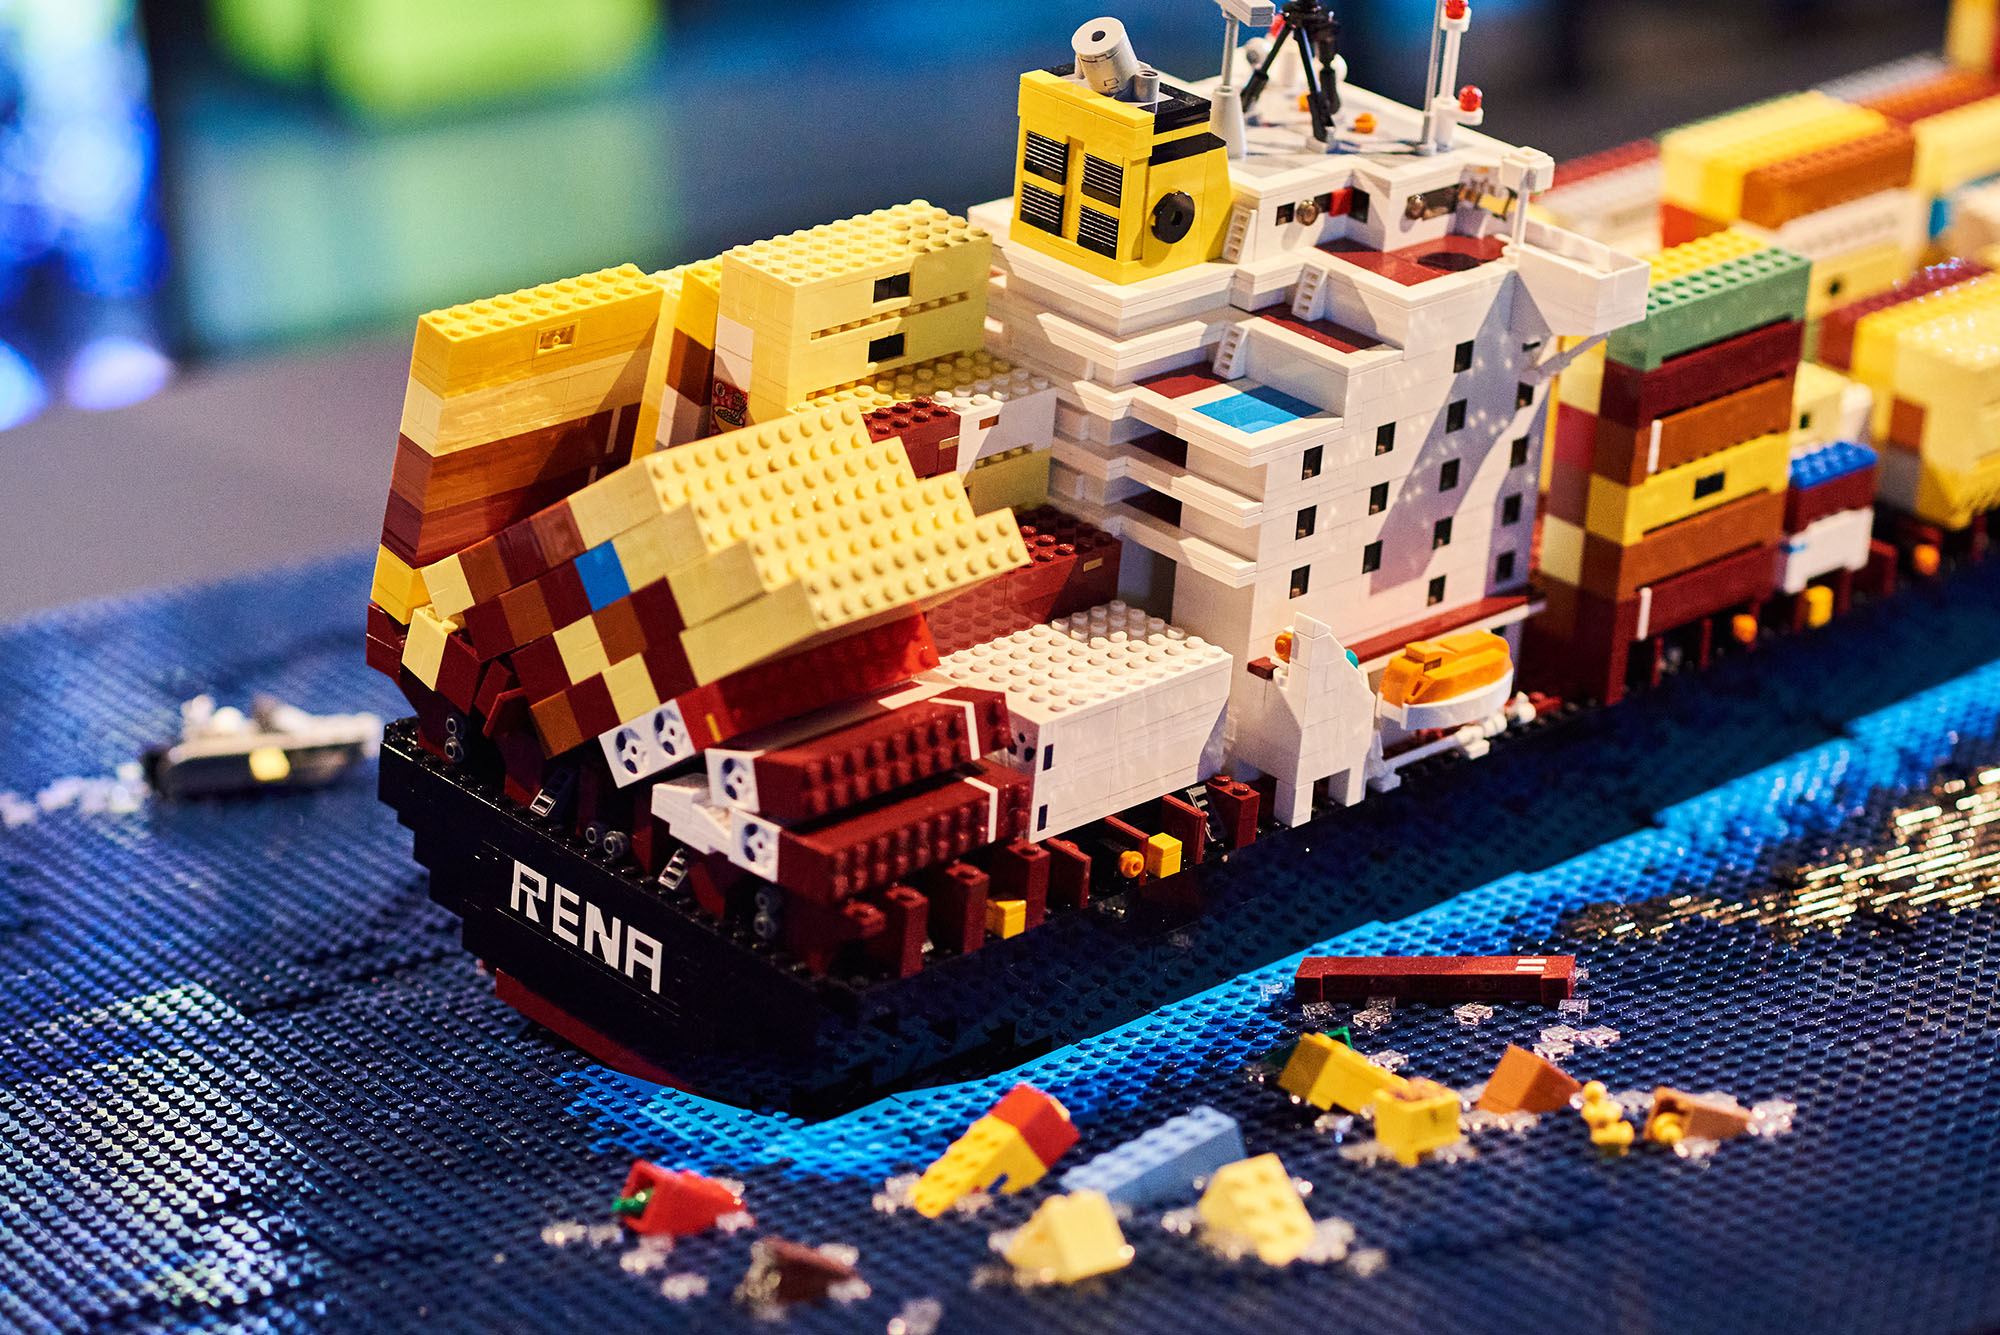 A LEGO model of the Rena